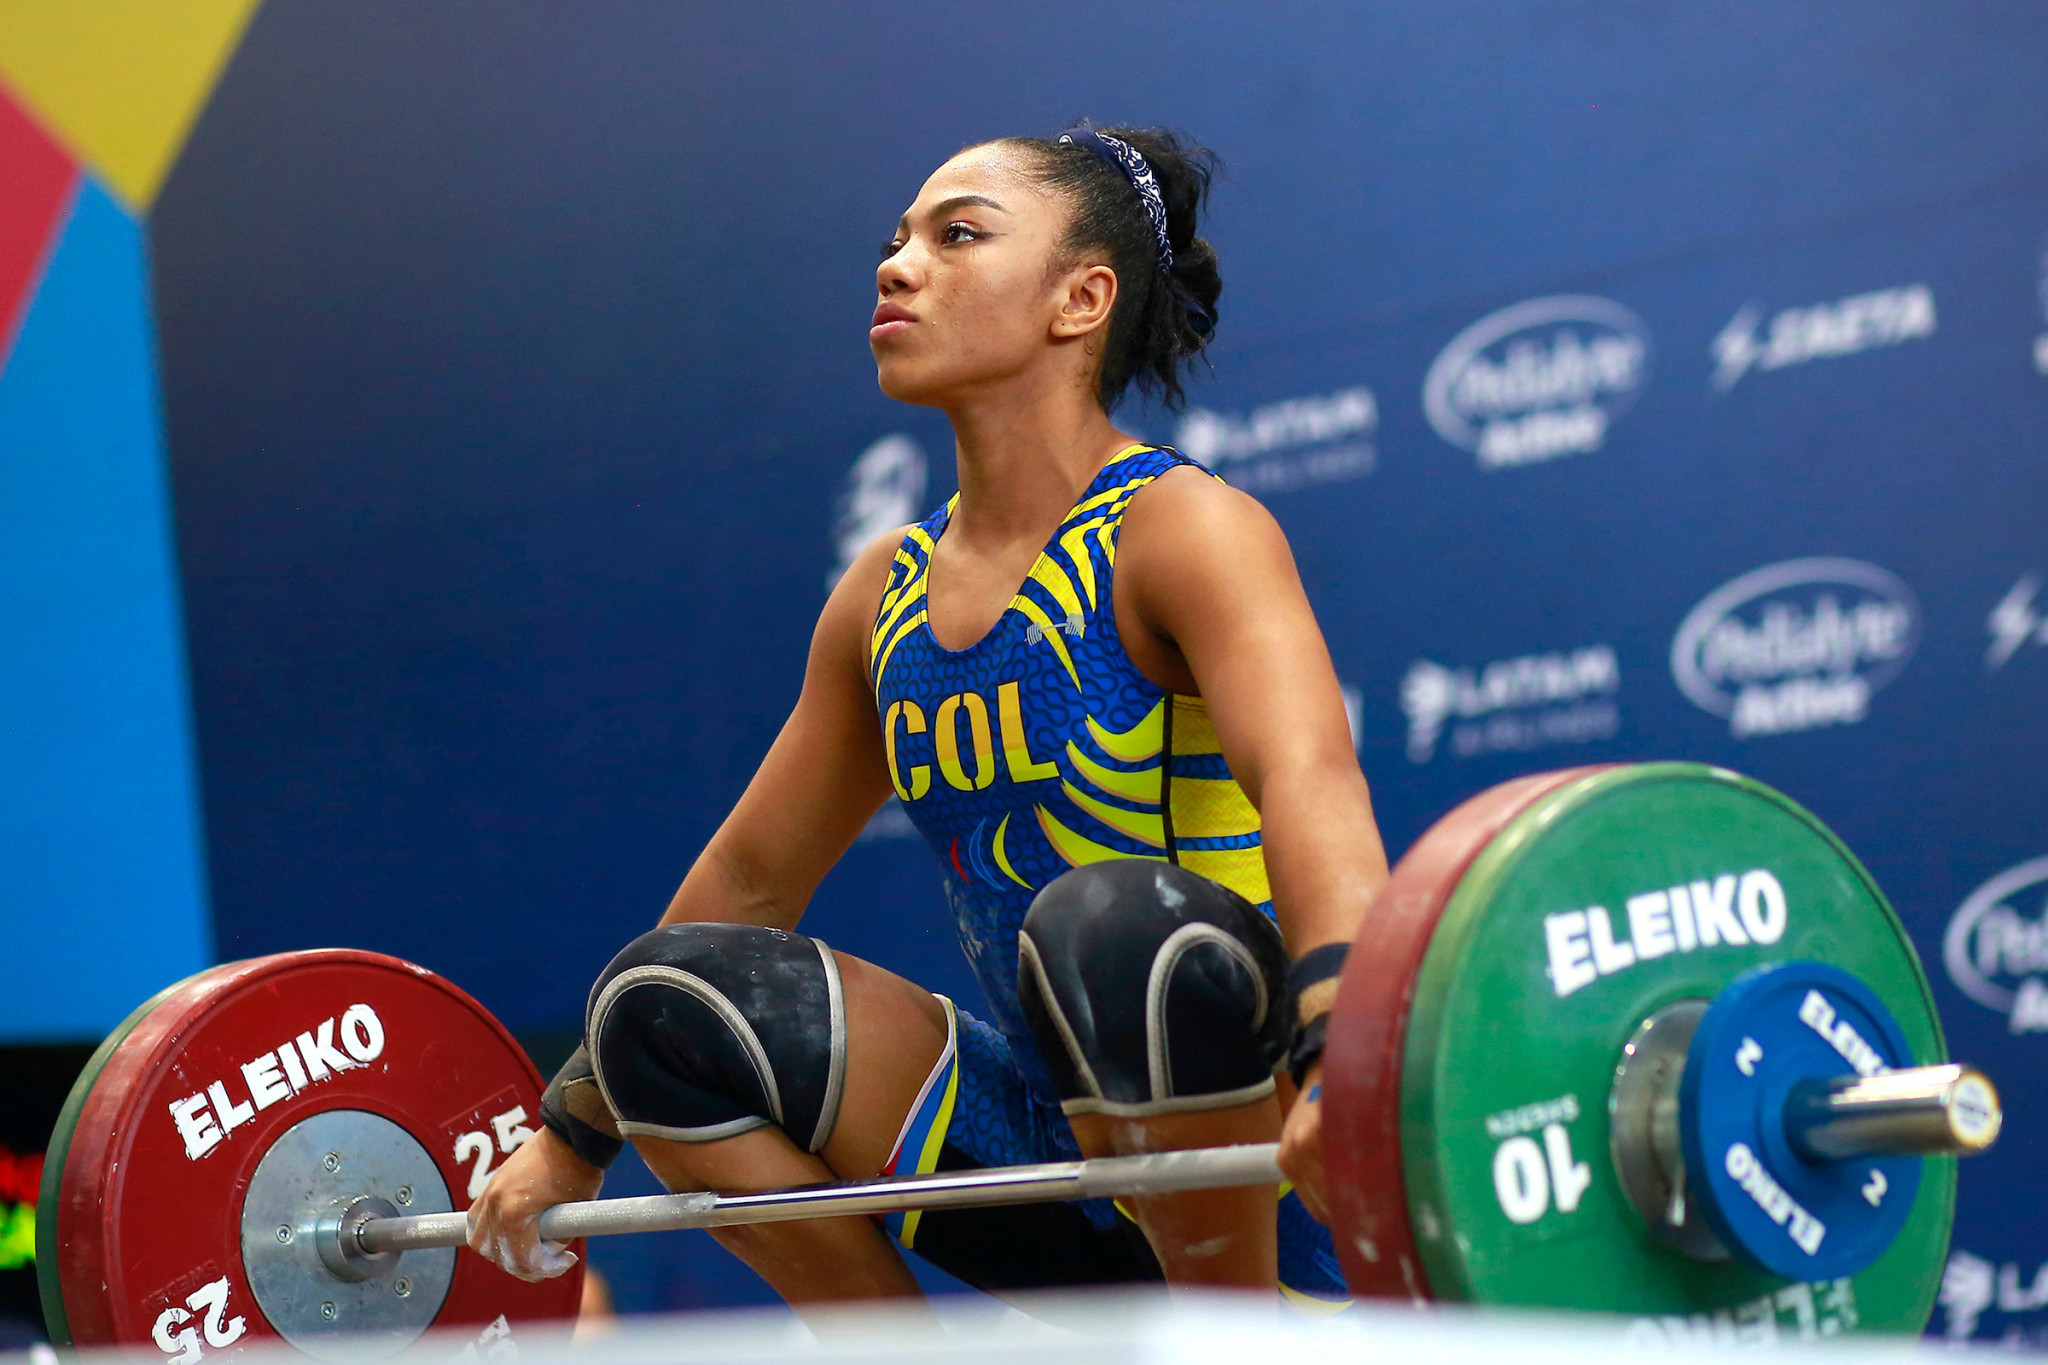 Concepcion Uusuga claimed Colombia's third gold of the day in the women's 59kg weightlifting tournament ©Agencia.Xpress Media